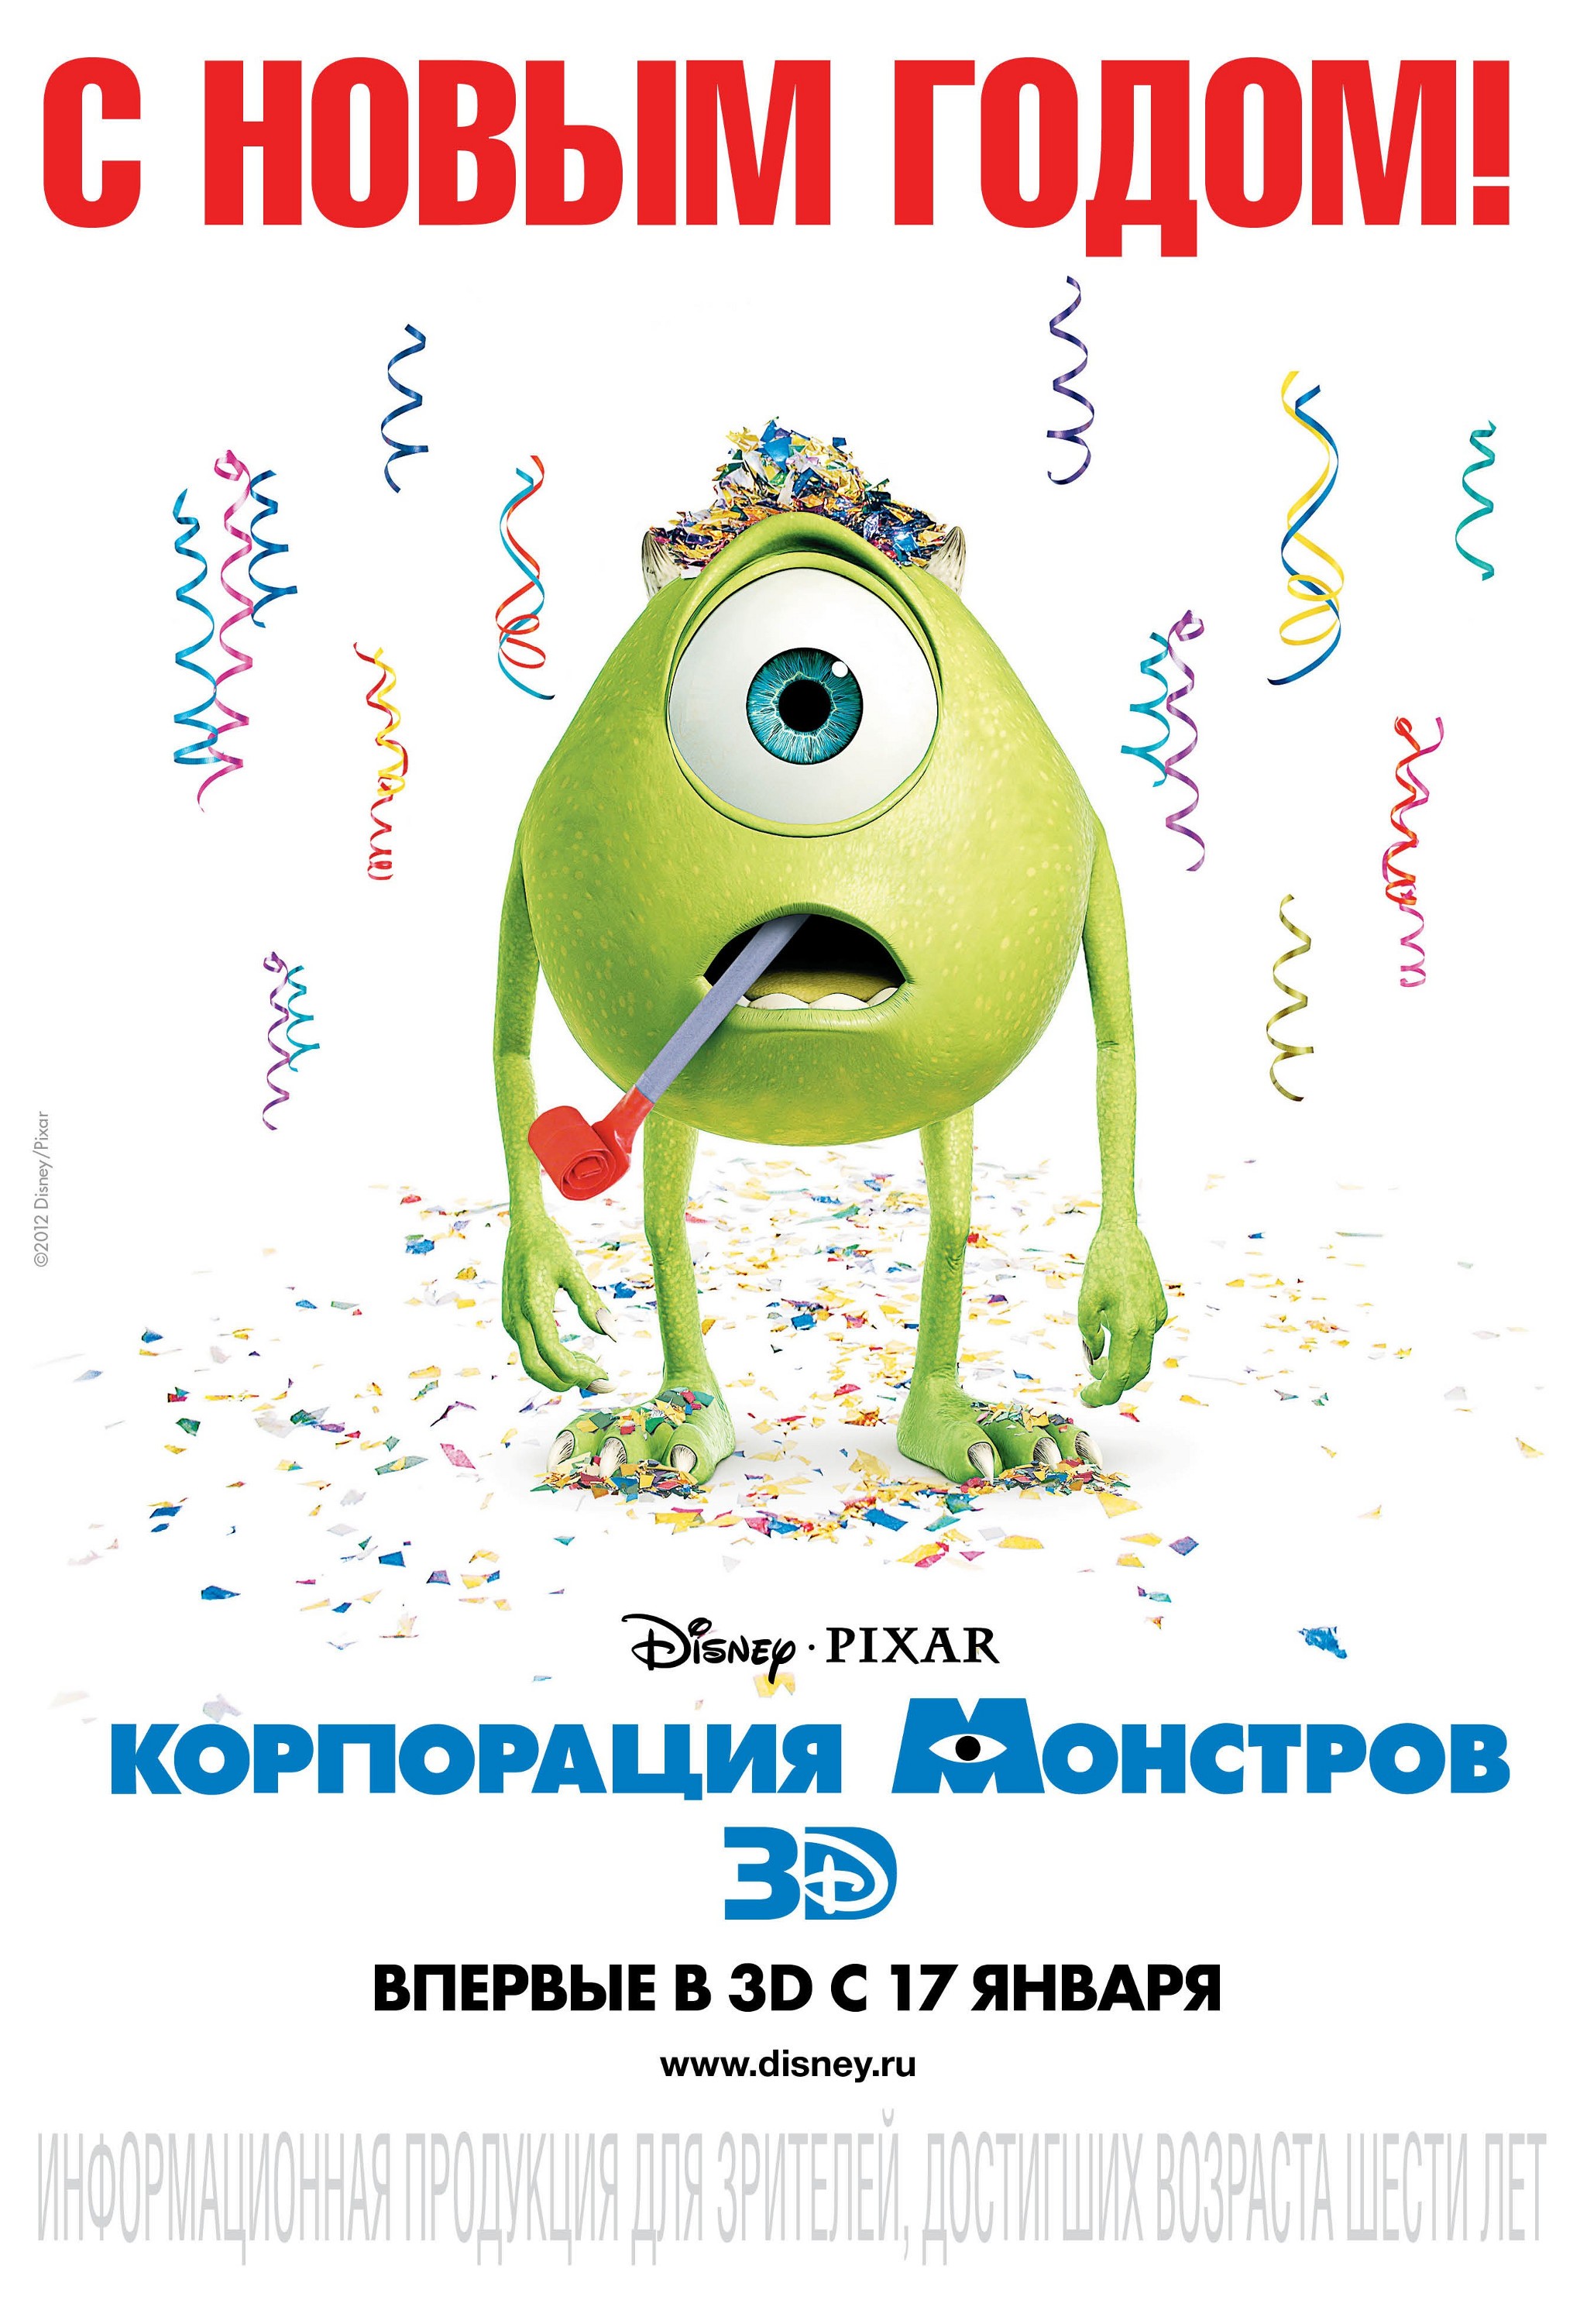 Mega Sized Movie Poster Image for Monsters, Inc. (#6 of 10)